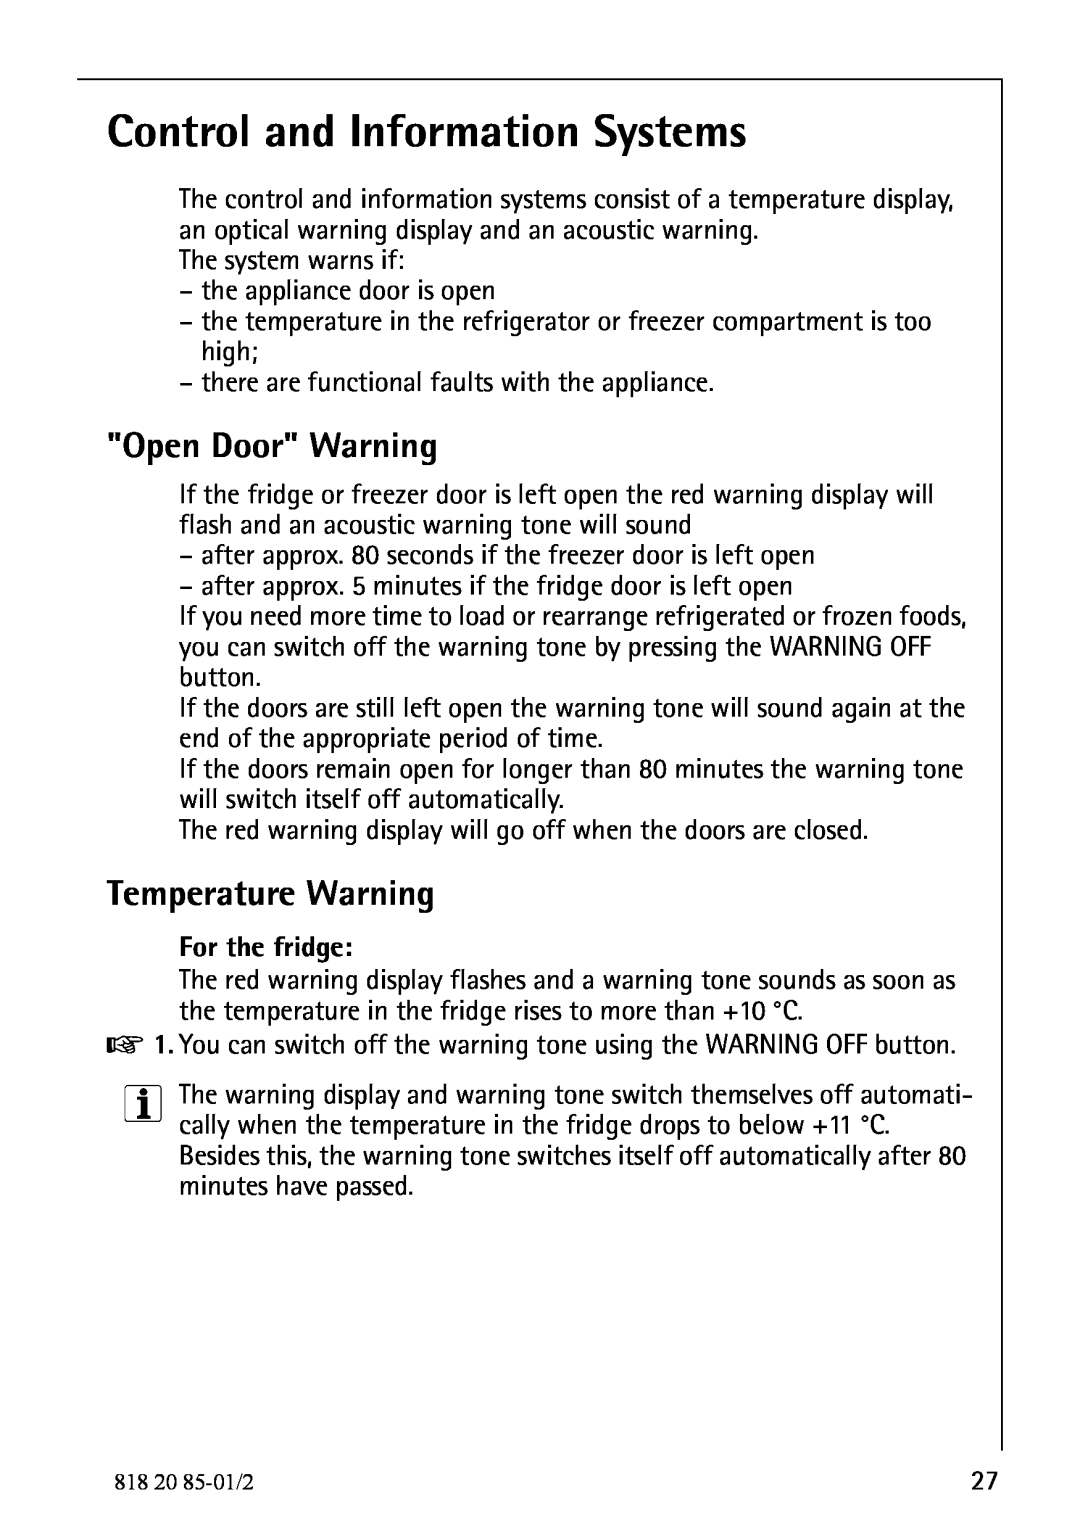 Electrolux 818 20 85 Control and Information Systems, Open Door Warning, Temperature Warning, For the fridge 